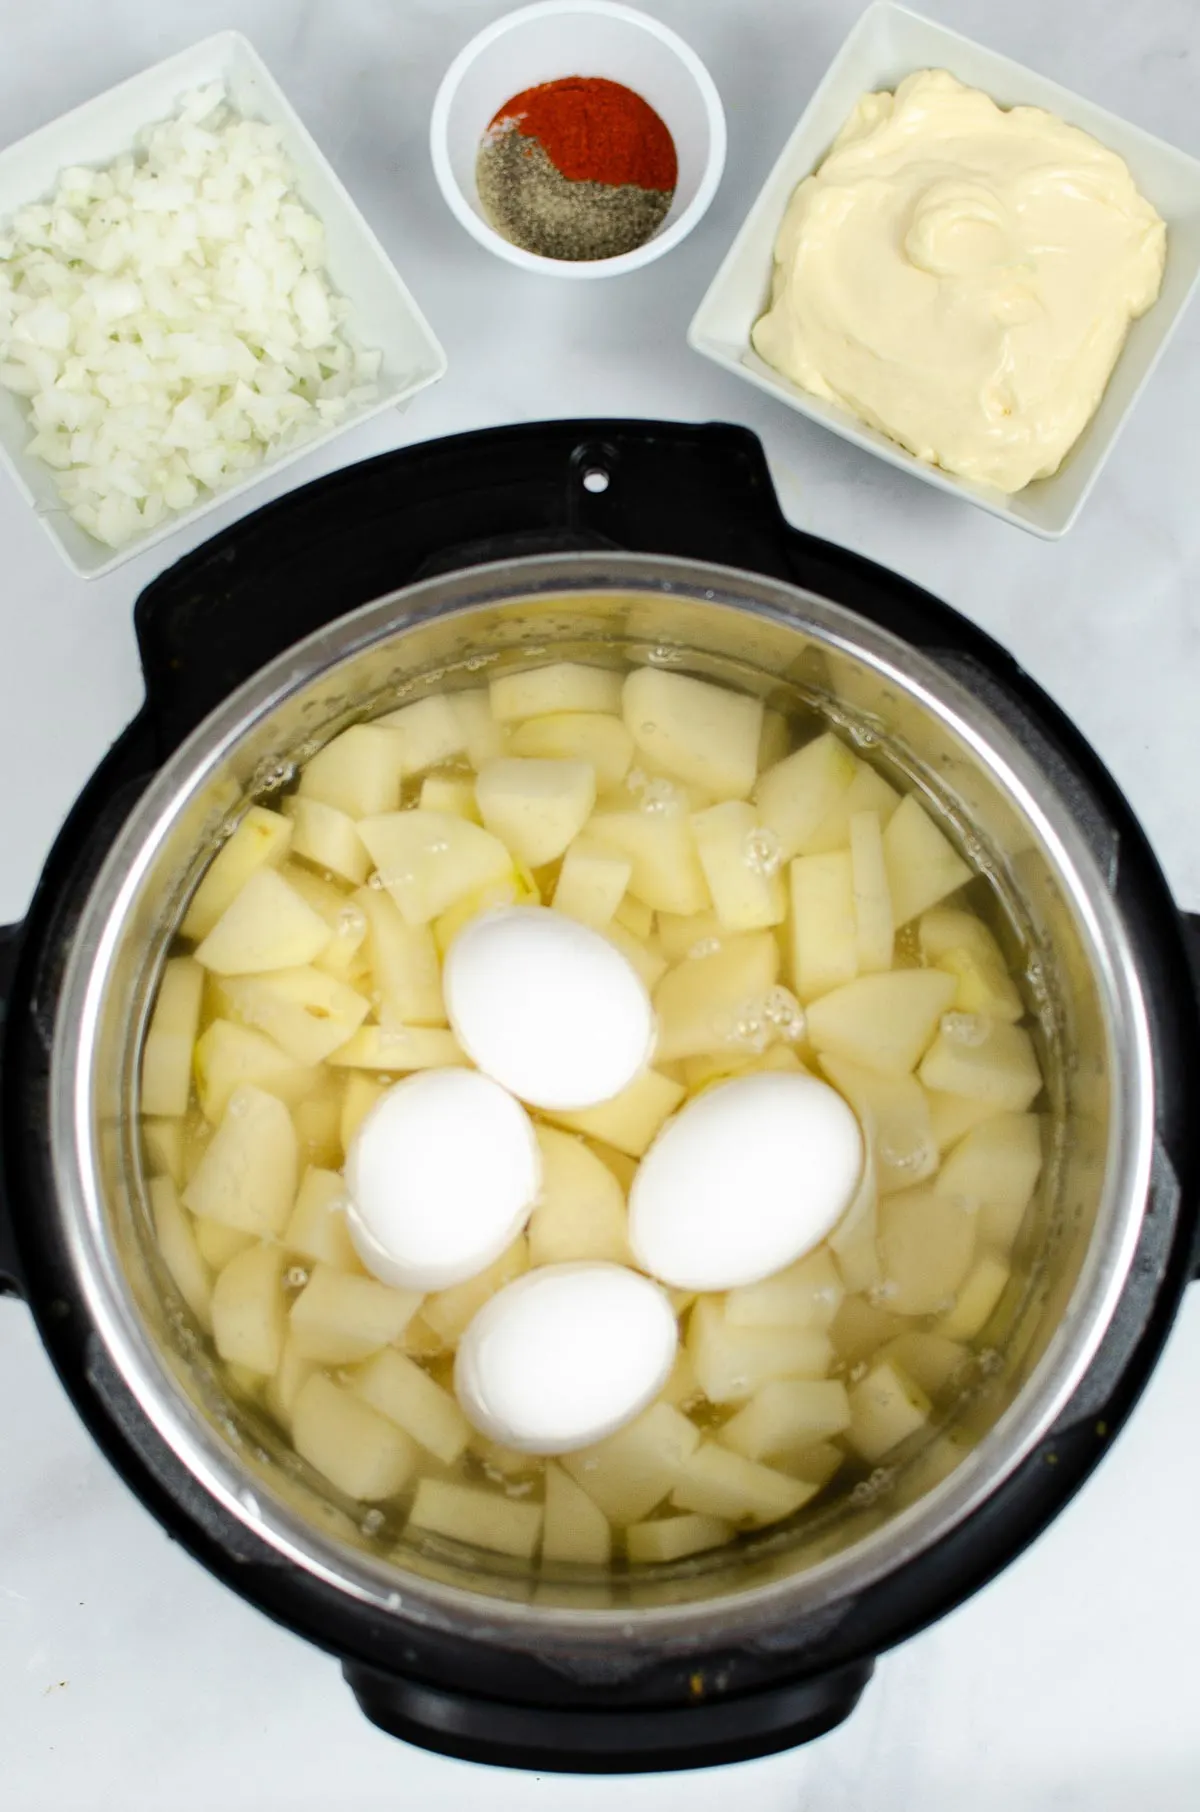 Chopped potatoes and eggs in the Instant Pot.